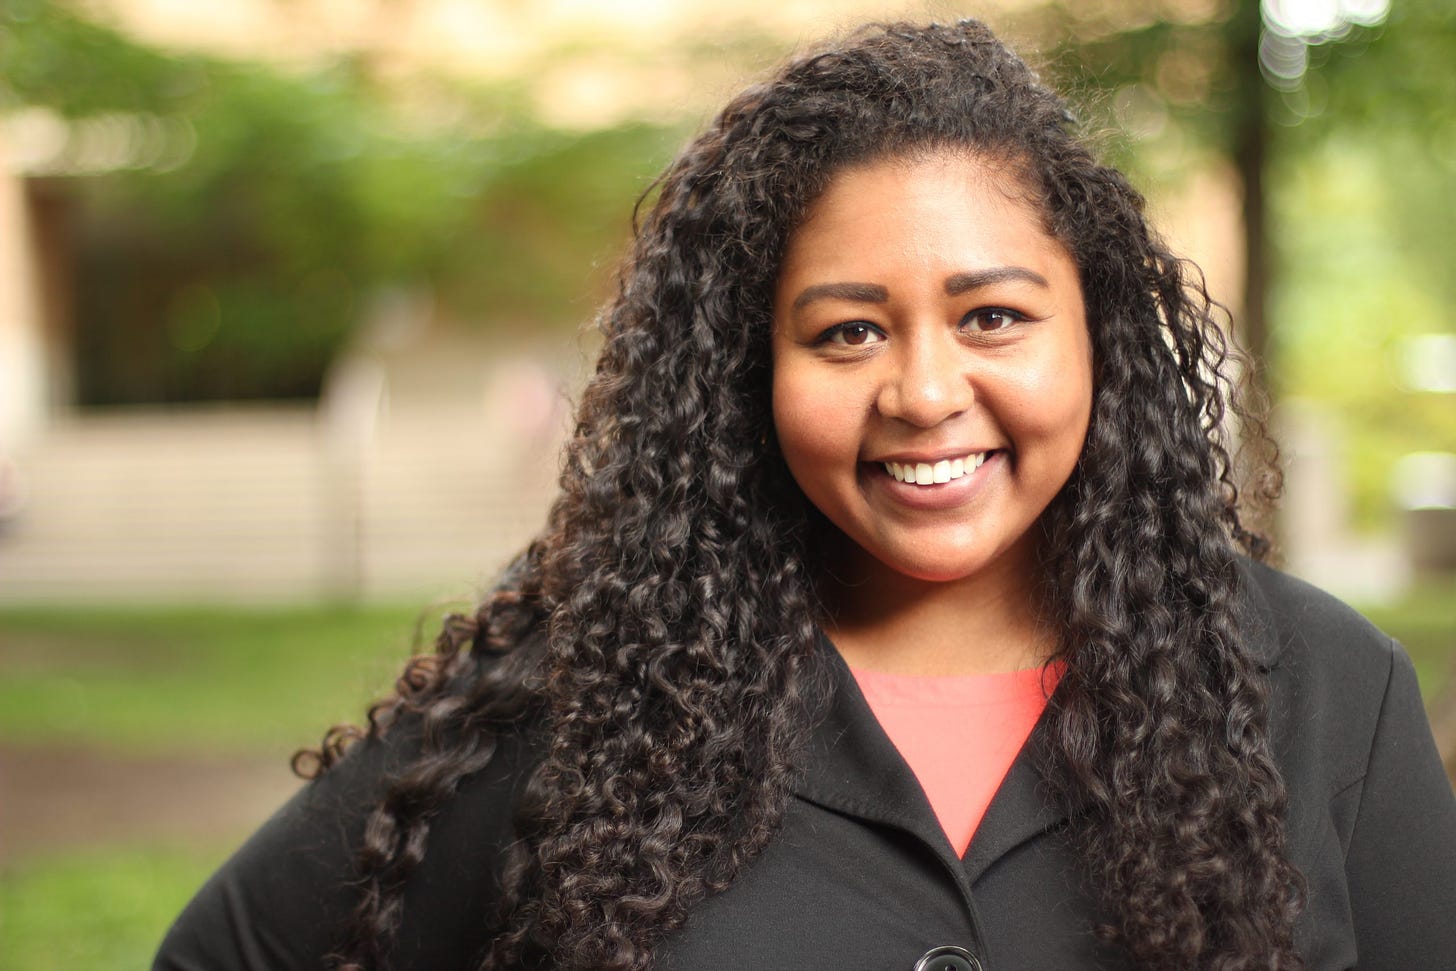 ELECTION INTERVIEW: Candace Avalos – Hey Neighbor PDX